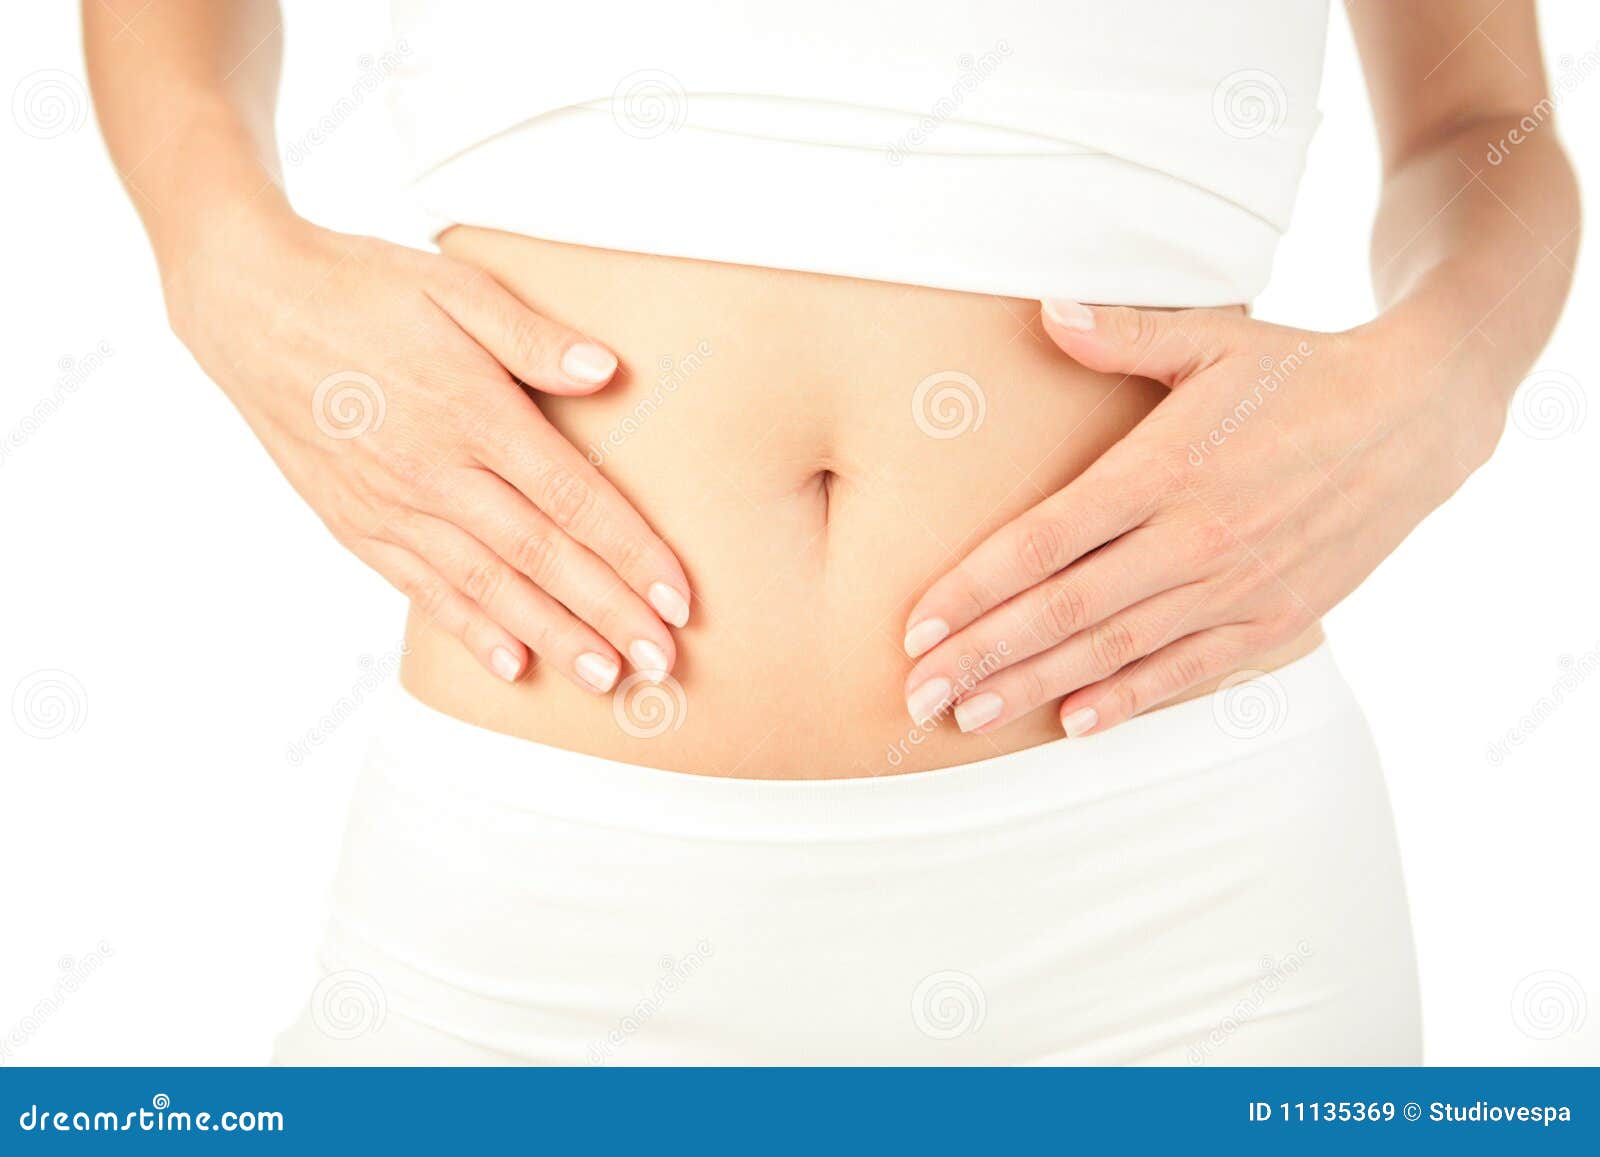 woman with hands on her stomach